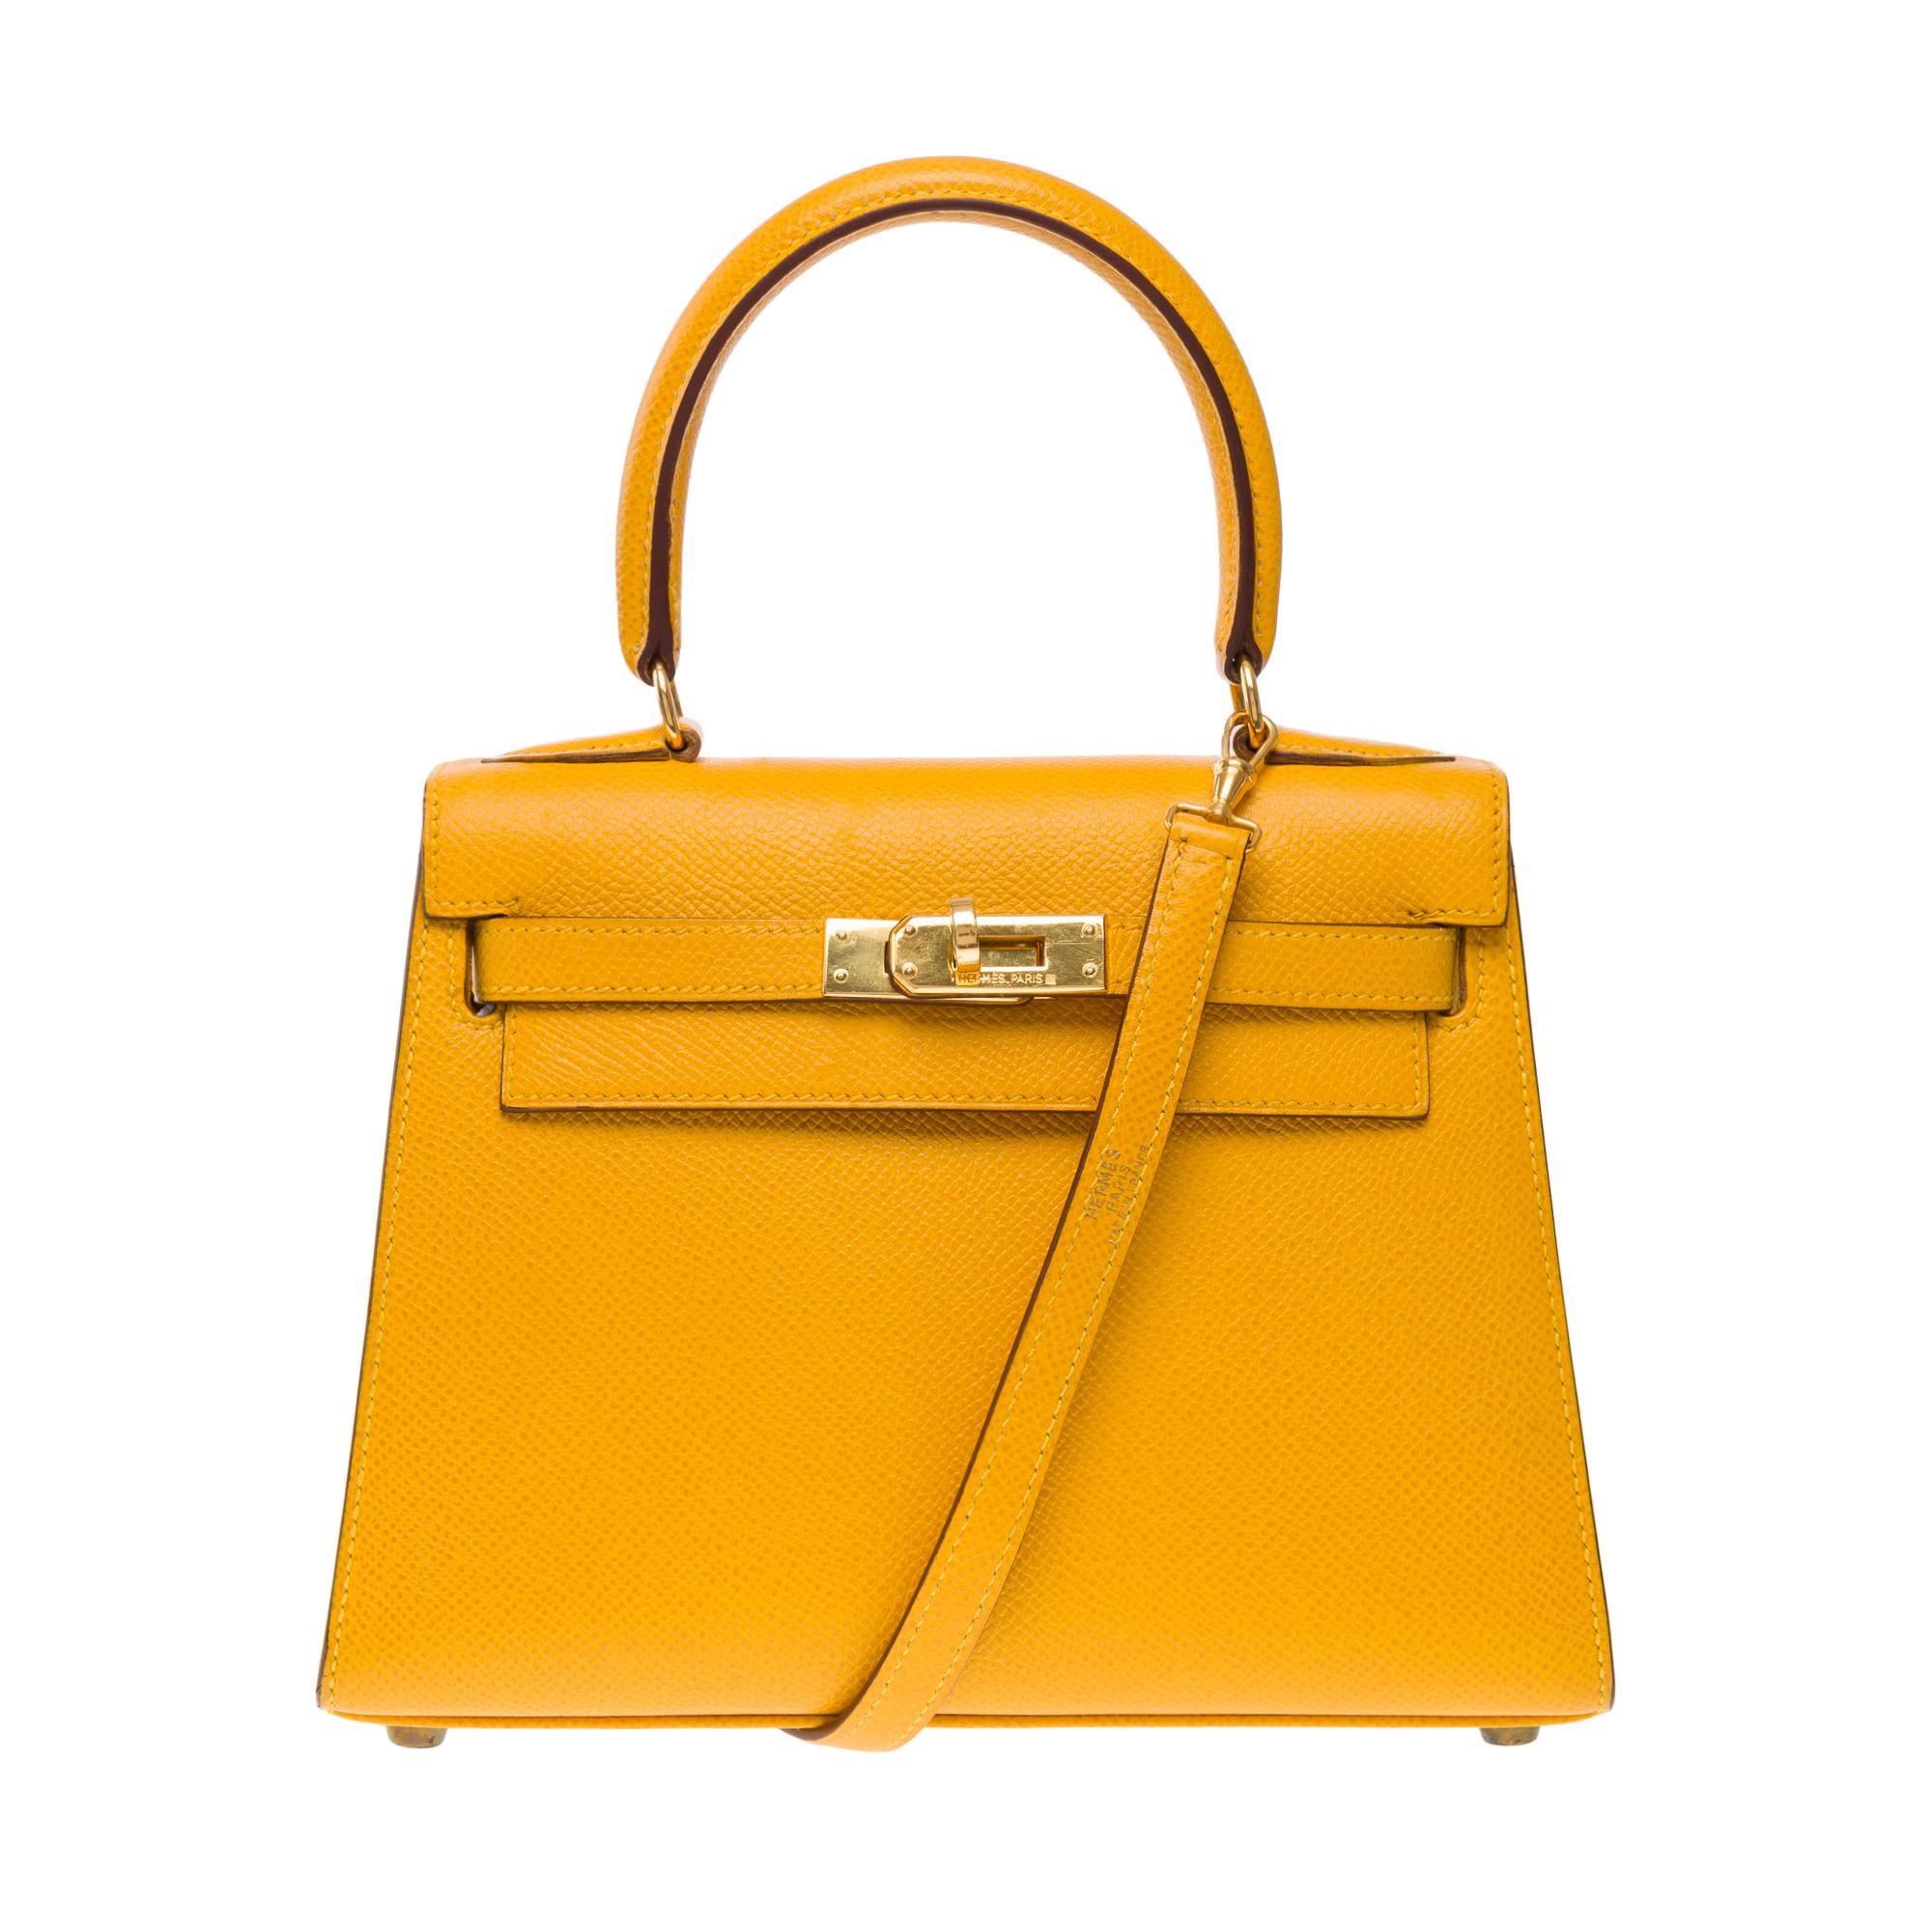 Exceptional​ ​&​ ​Rare​ ​Handbag​ ​Hermes​ ​Kelly​ ​Mini​ ​20​ ​cm​ ​in​ ​amber​ ​yellow​ ​Courchevel​ ​leather,​ ​gold​ ​plated​ ​metal​ ​trim,​ ​yellow​ ​Courchevel​ ​leather​ ​handle,​ ​yellow​ ​Courchevel​ ​shoulder​ ​strap​ ​for​ ​a​ ​hand​